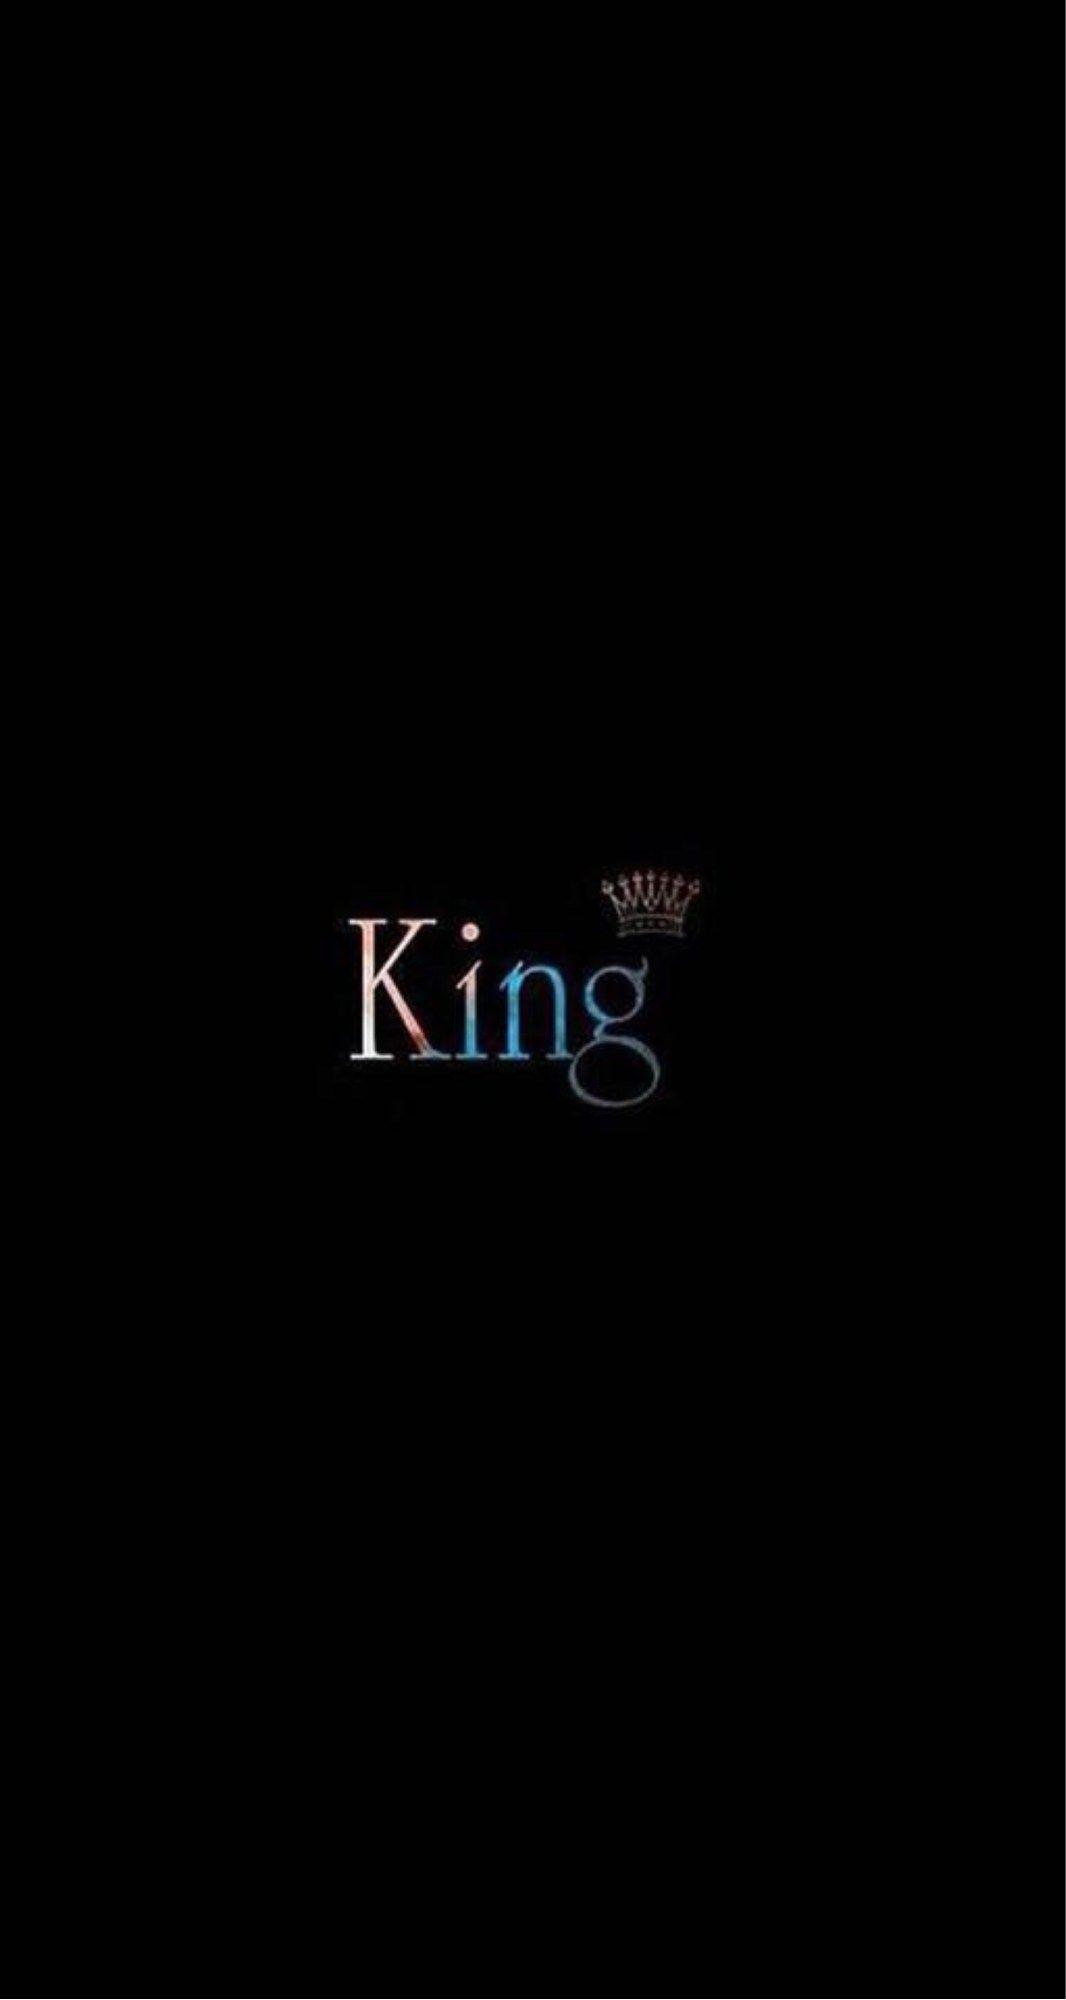 Image result for her king wallpaper for iphone in 2019